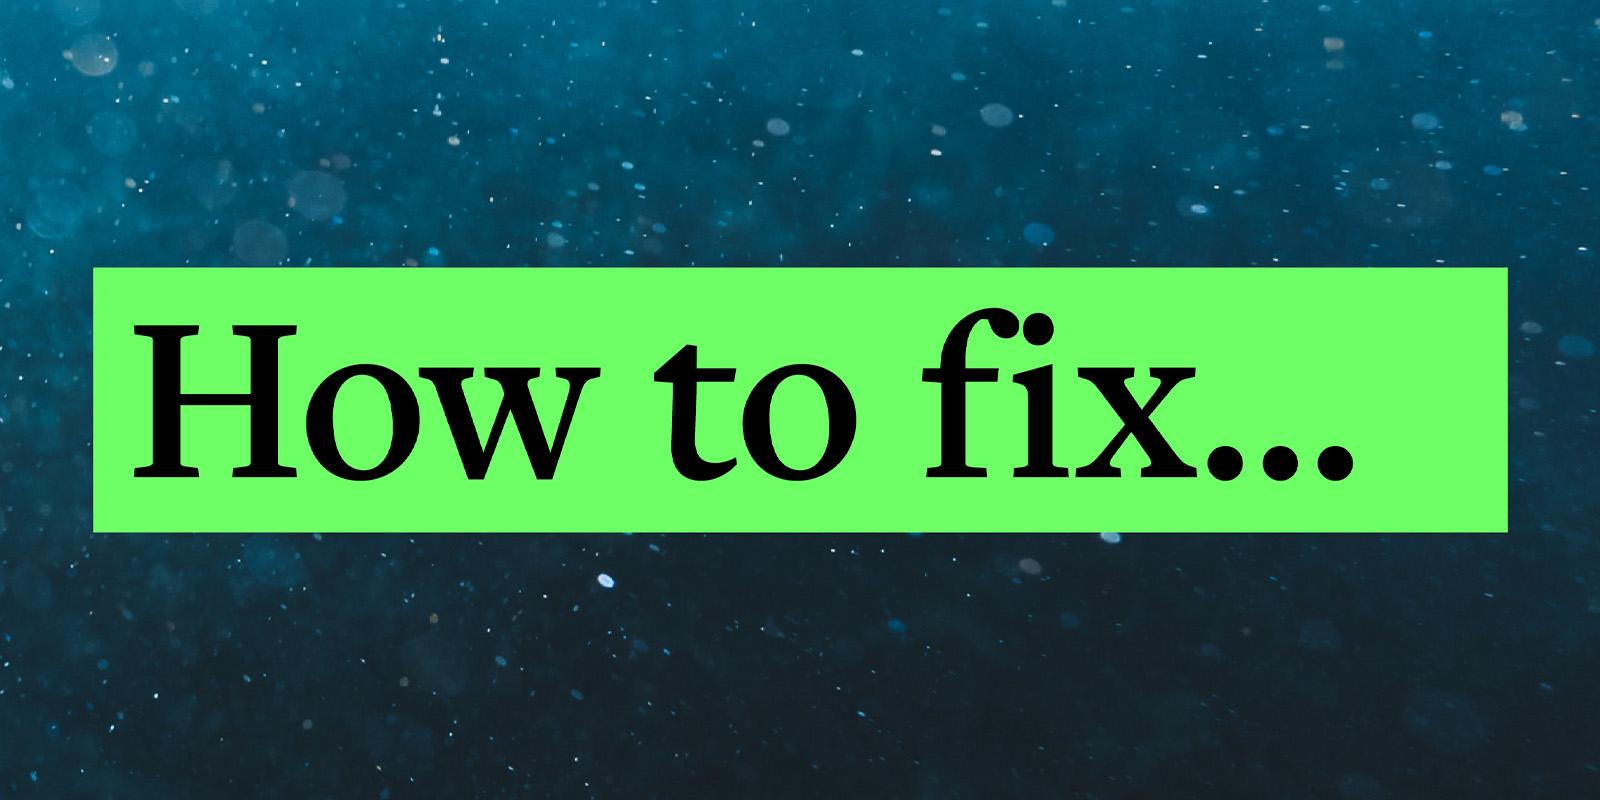 Civil engineer tackles heating for all in brand-new “How to Fix...” podcast